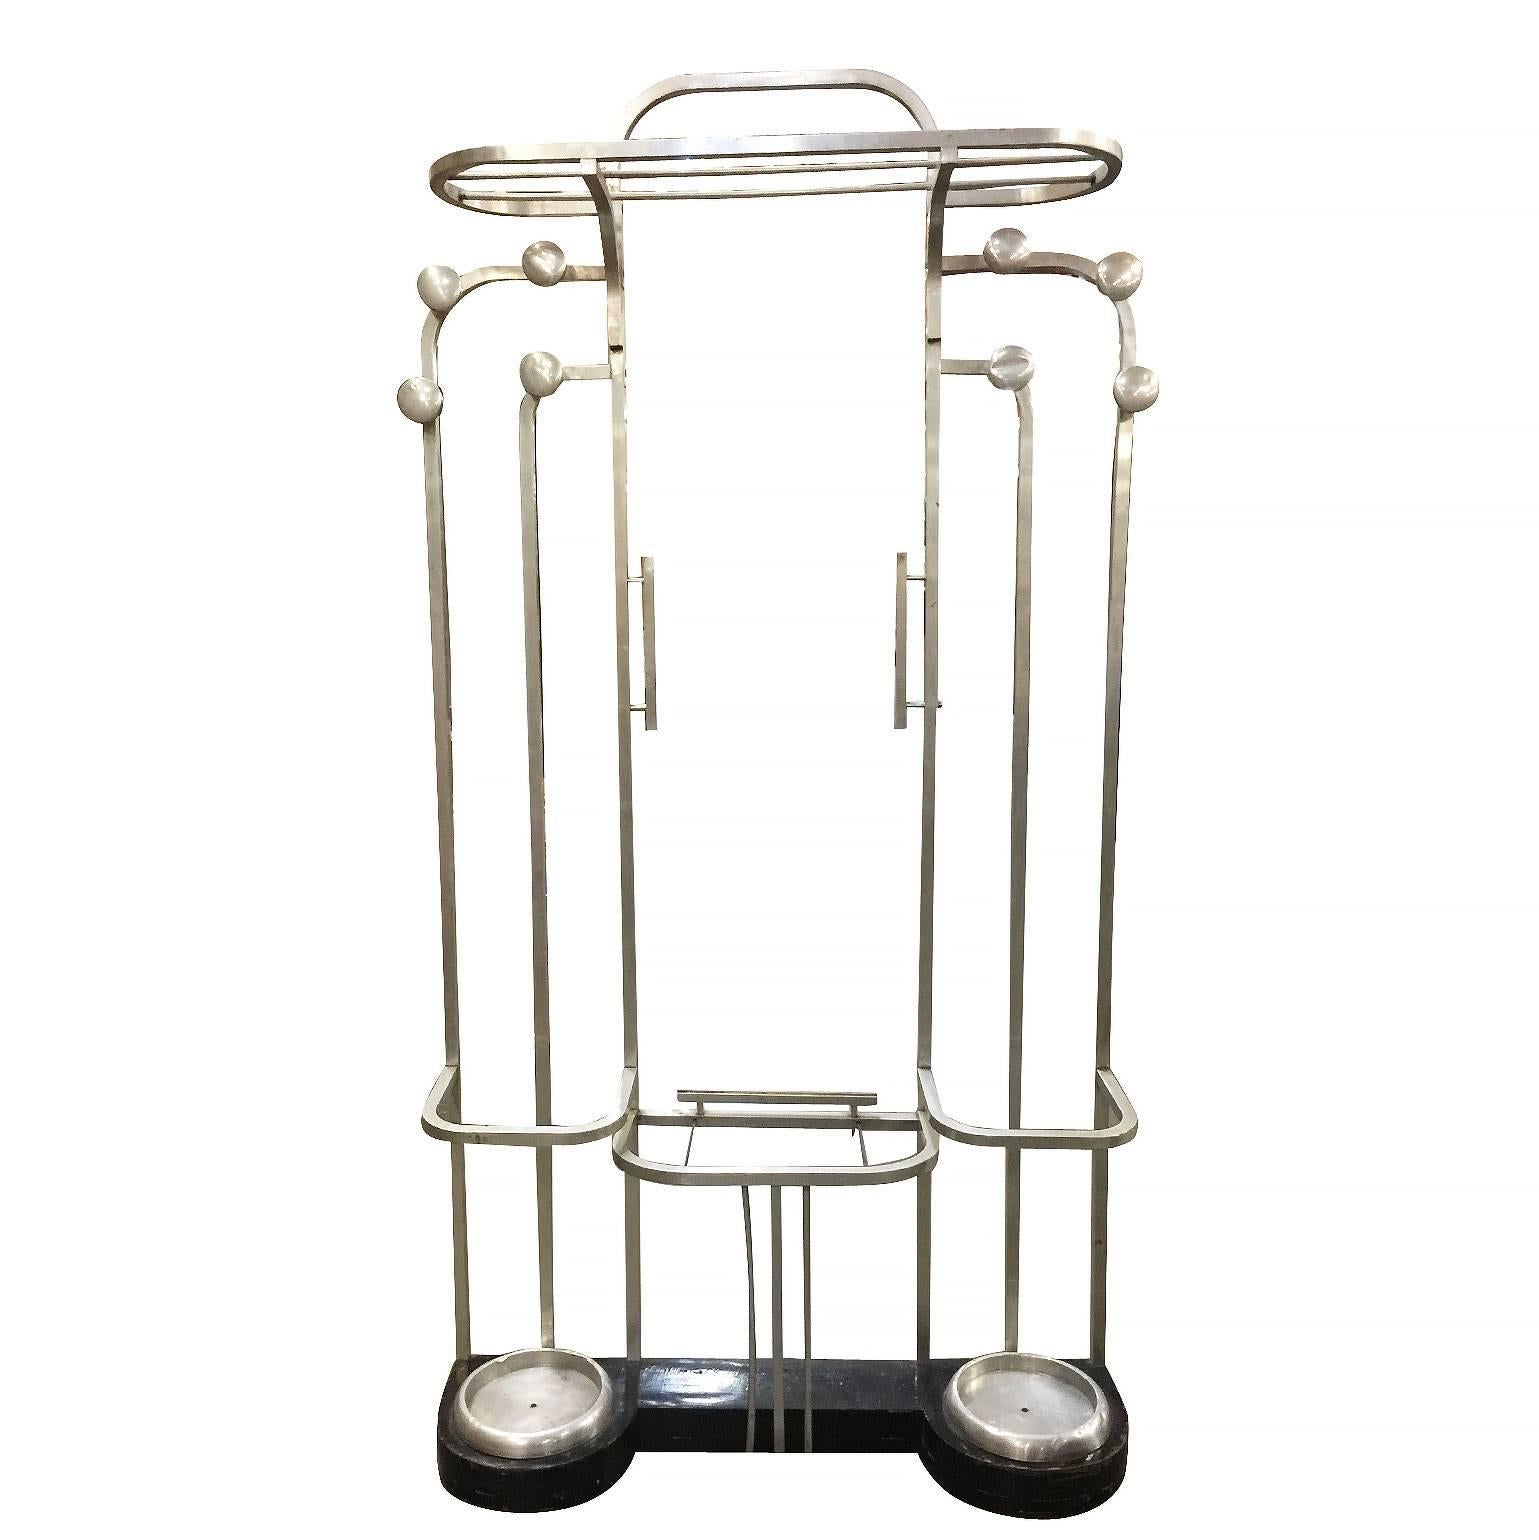 Large streamline French Art Deco hall tree, circa 1930. Constructed of square aluminum tubing, this stand has 